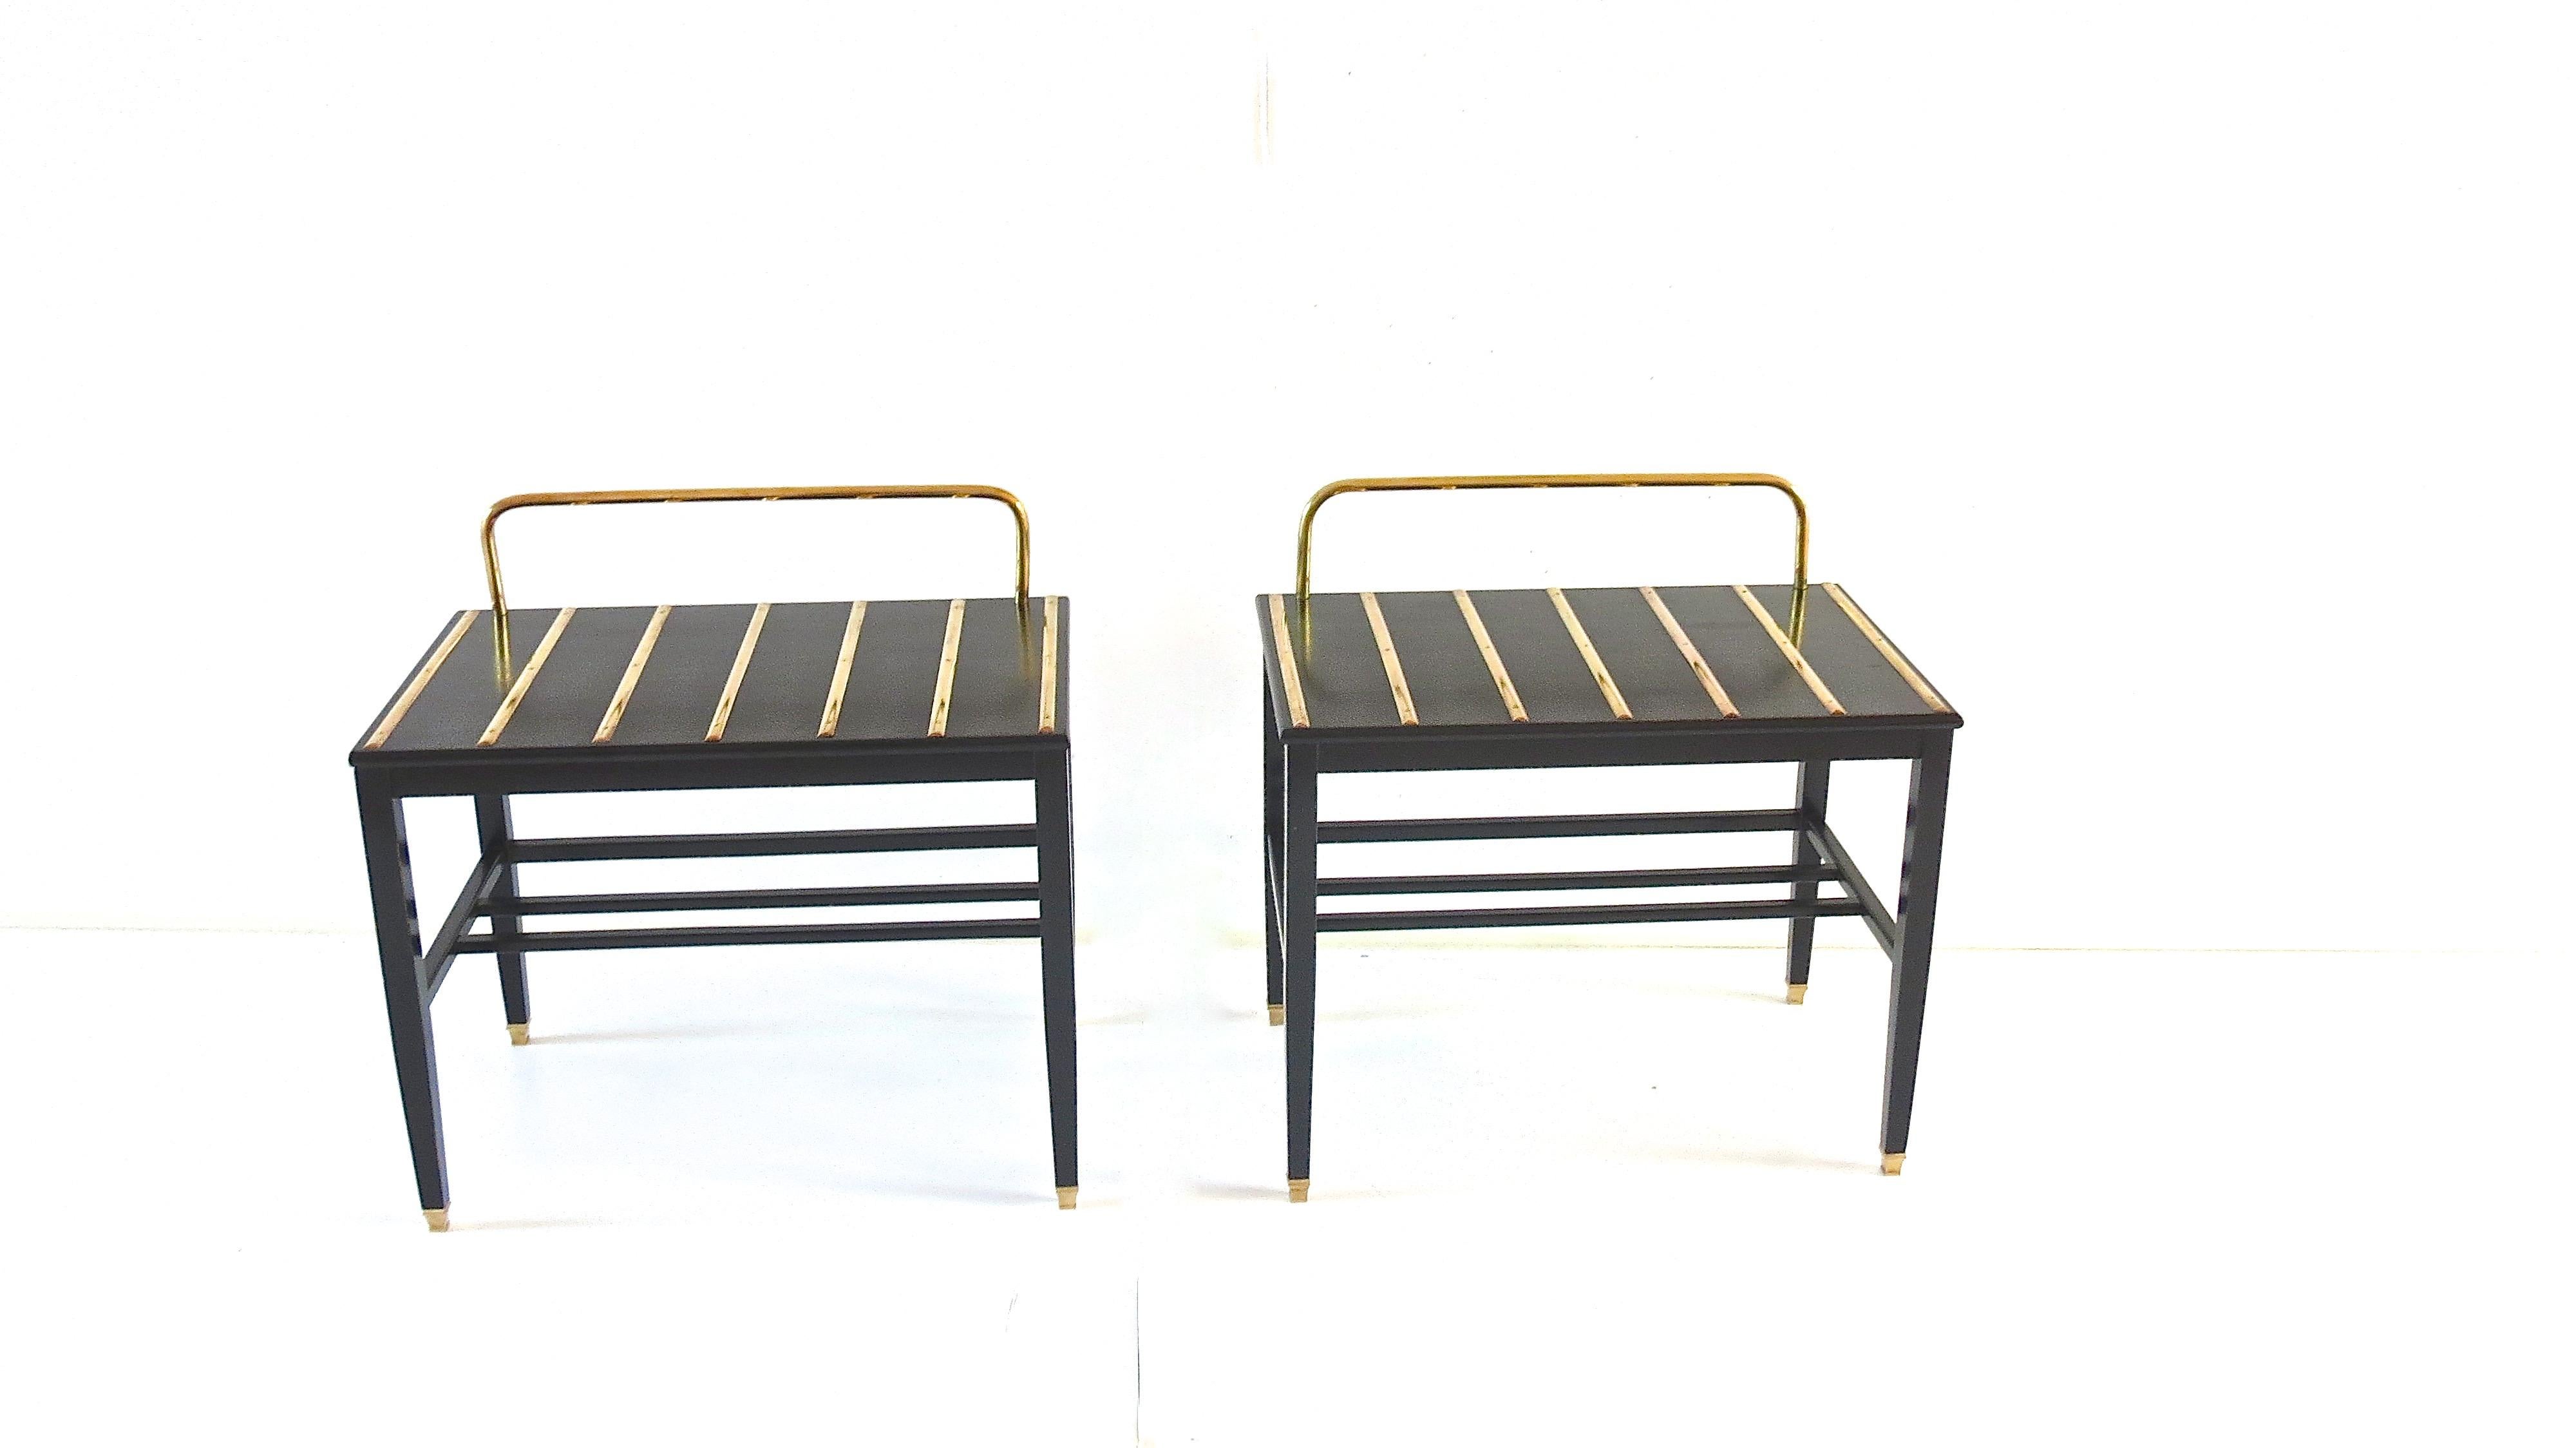 Pair of luggage-racks, side tables designed by Gio Ponti and executed by Giordano Chiesa for the Hotel Royal, Naples, 1955
in 2005 arch. Cristina Longo used original items from Hotel Royal in Naples and she has made 10 limited editon pair of stands